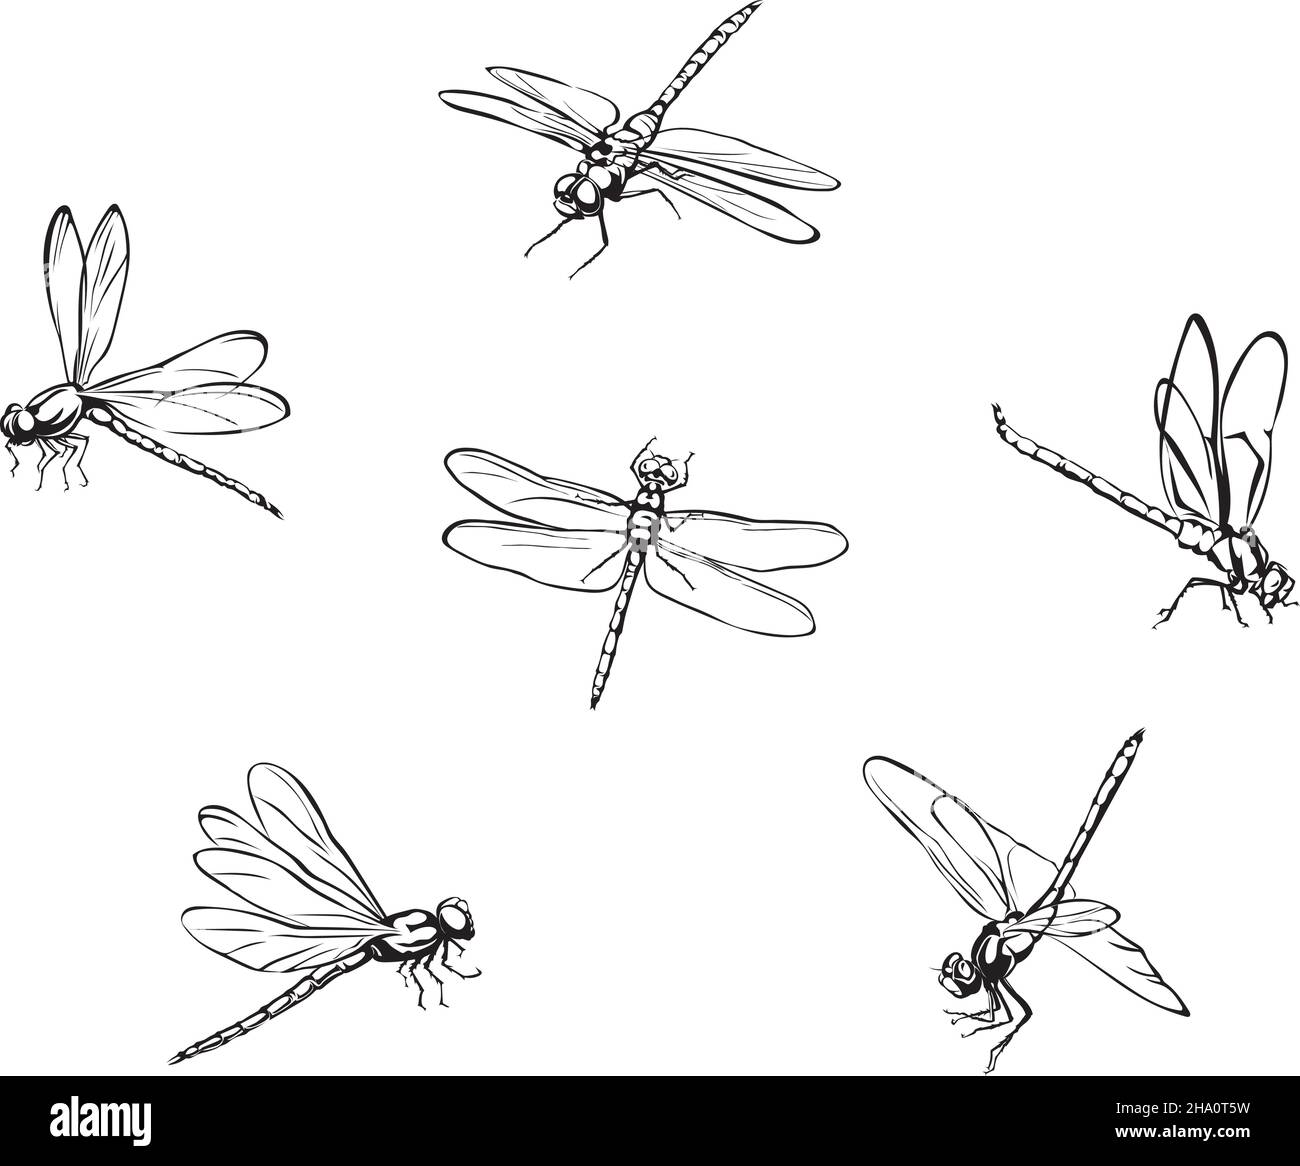 Dragonfly, vector image of dragonflies, flying dragonflies, vector illustration for use in logos, signs, trademarks, for design and advertising, color Stock Vector